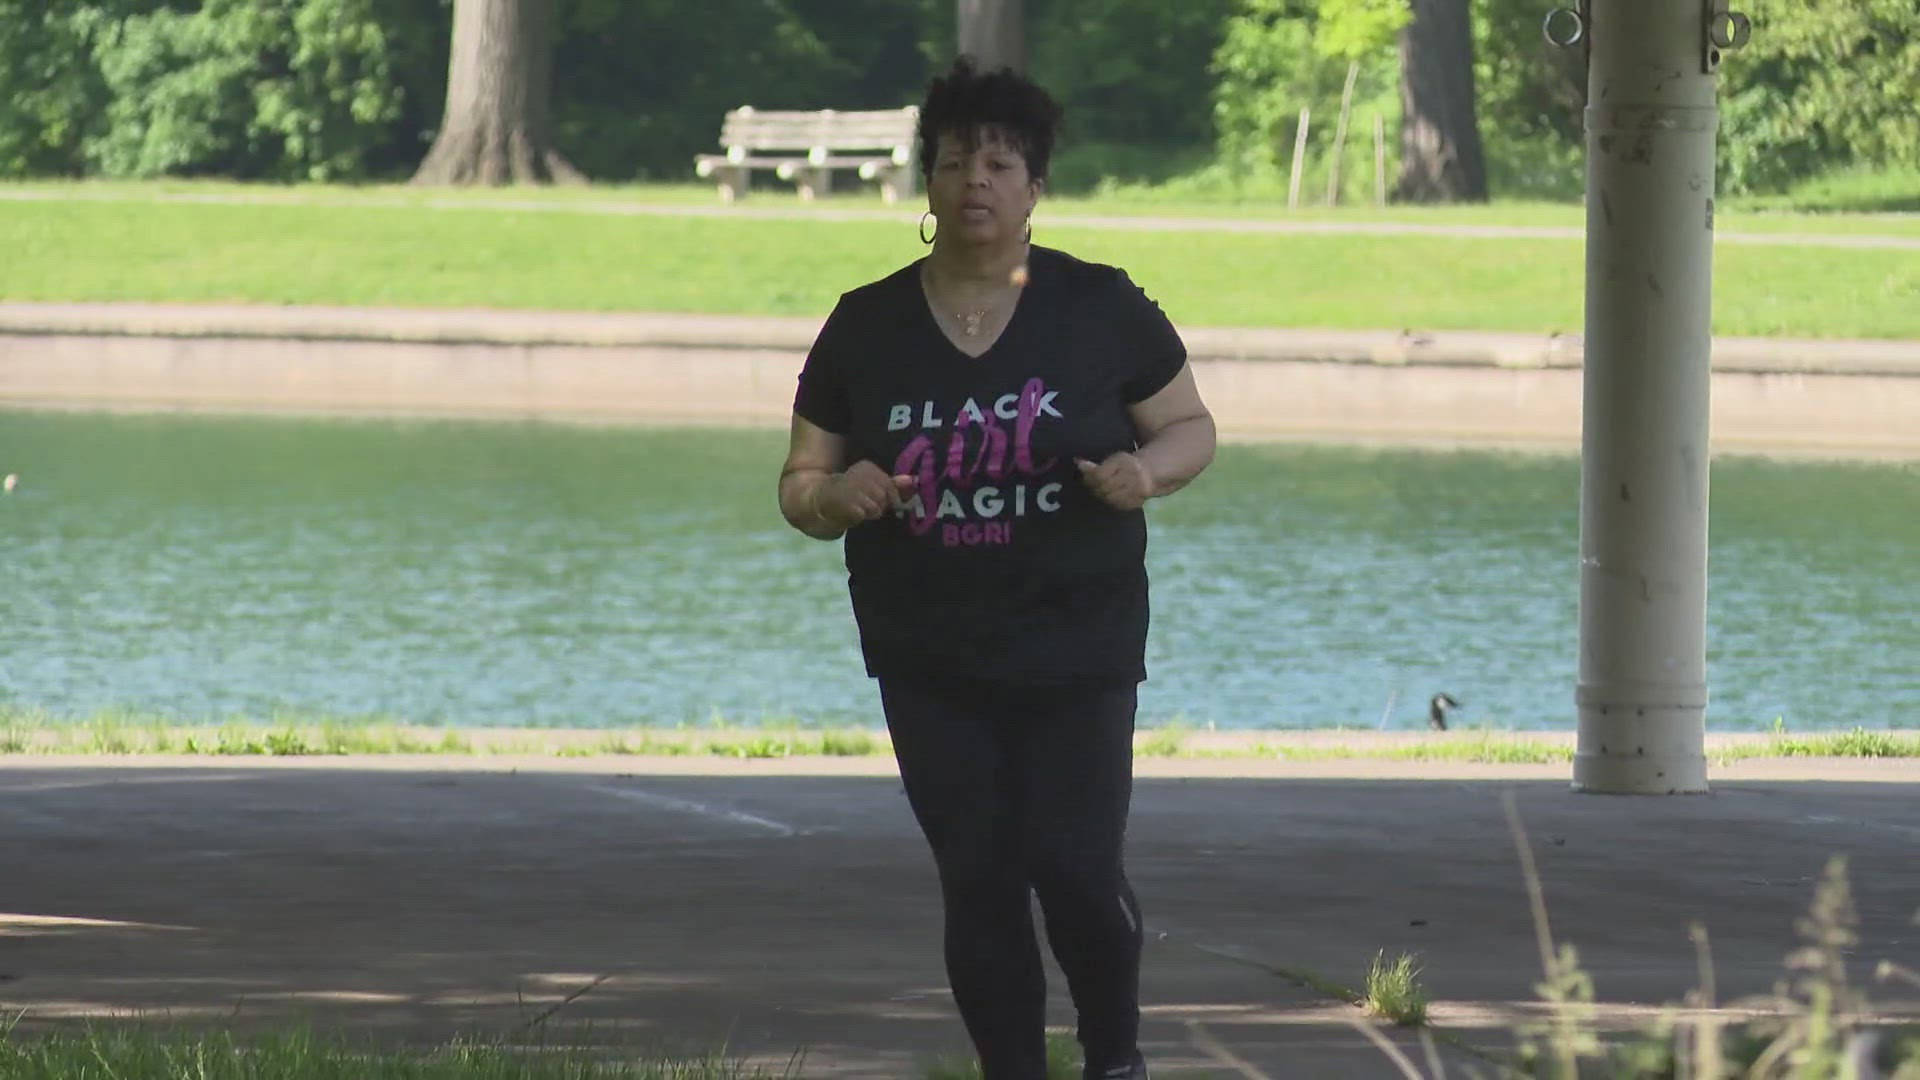 Candice Toney's running journey began more than 10 years ago, but was derailed by health issues and the pandemic. This year, she's back on the pavement.